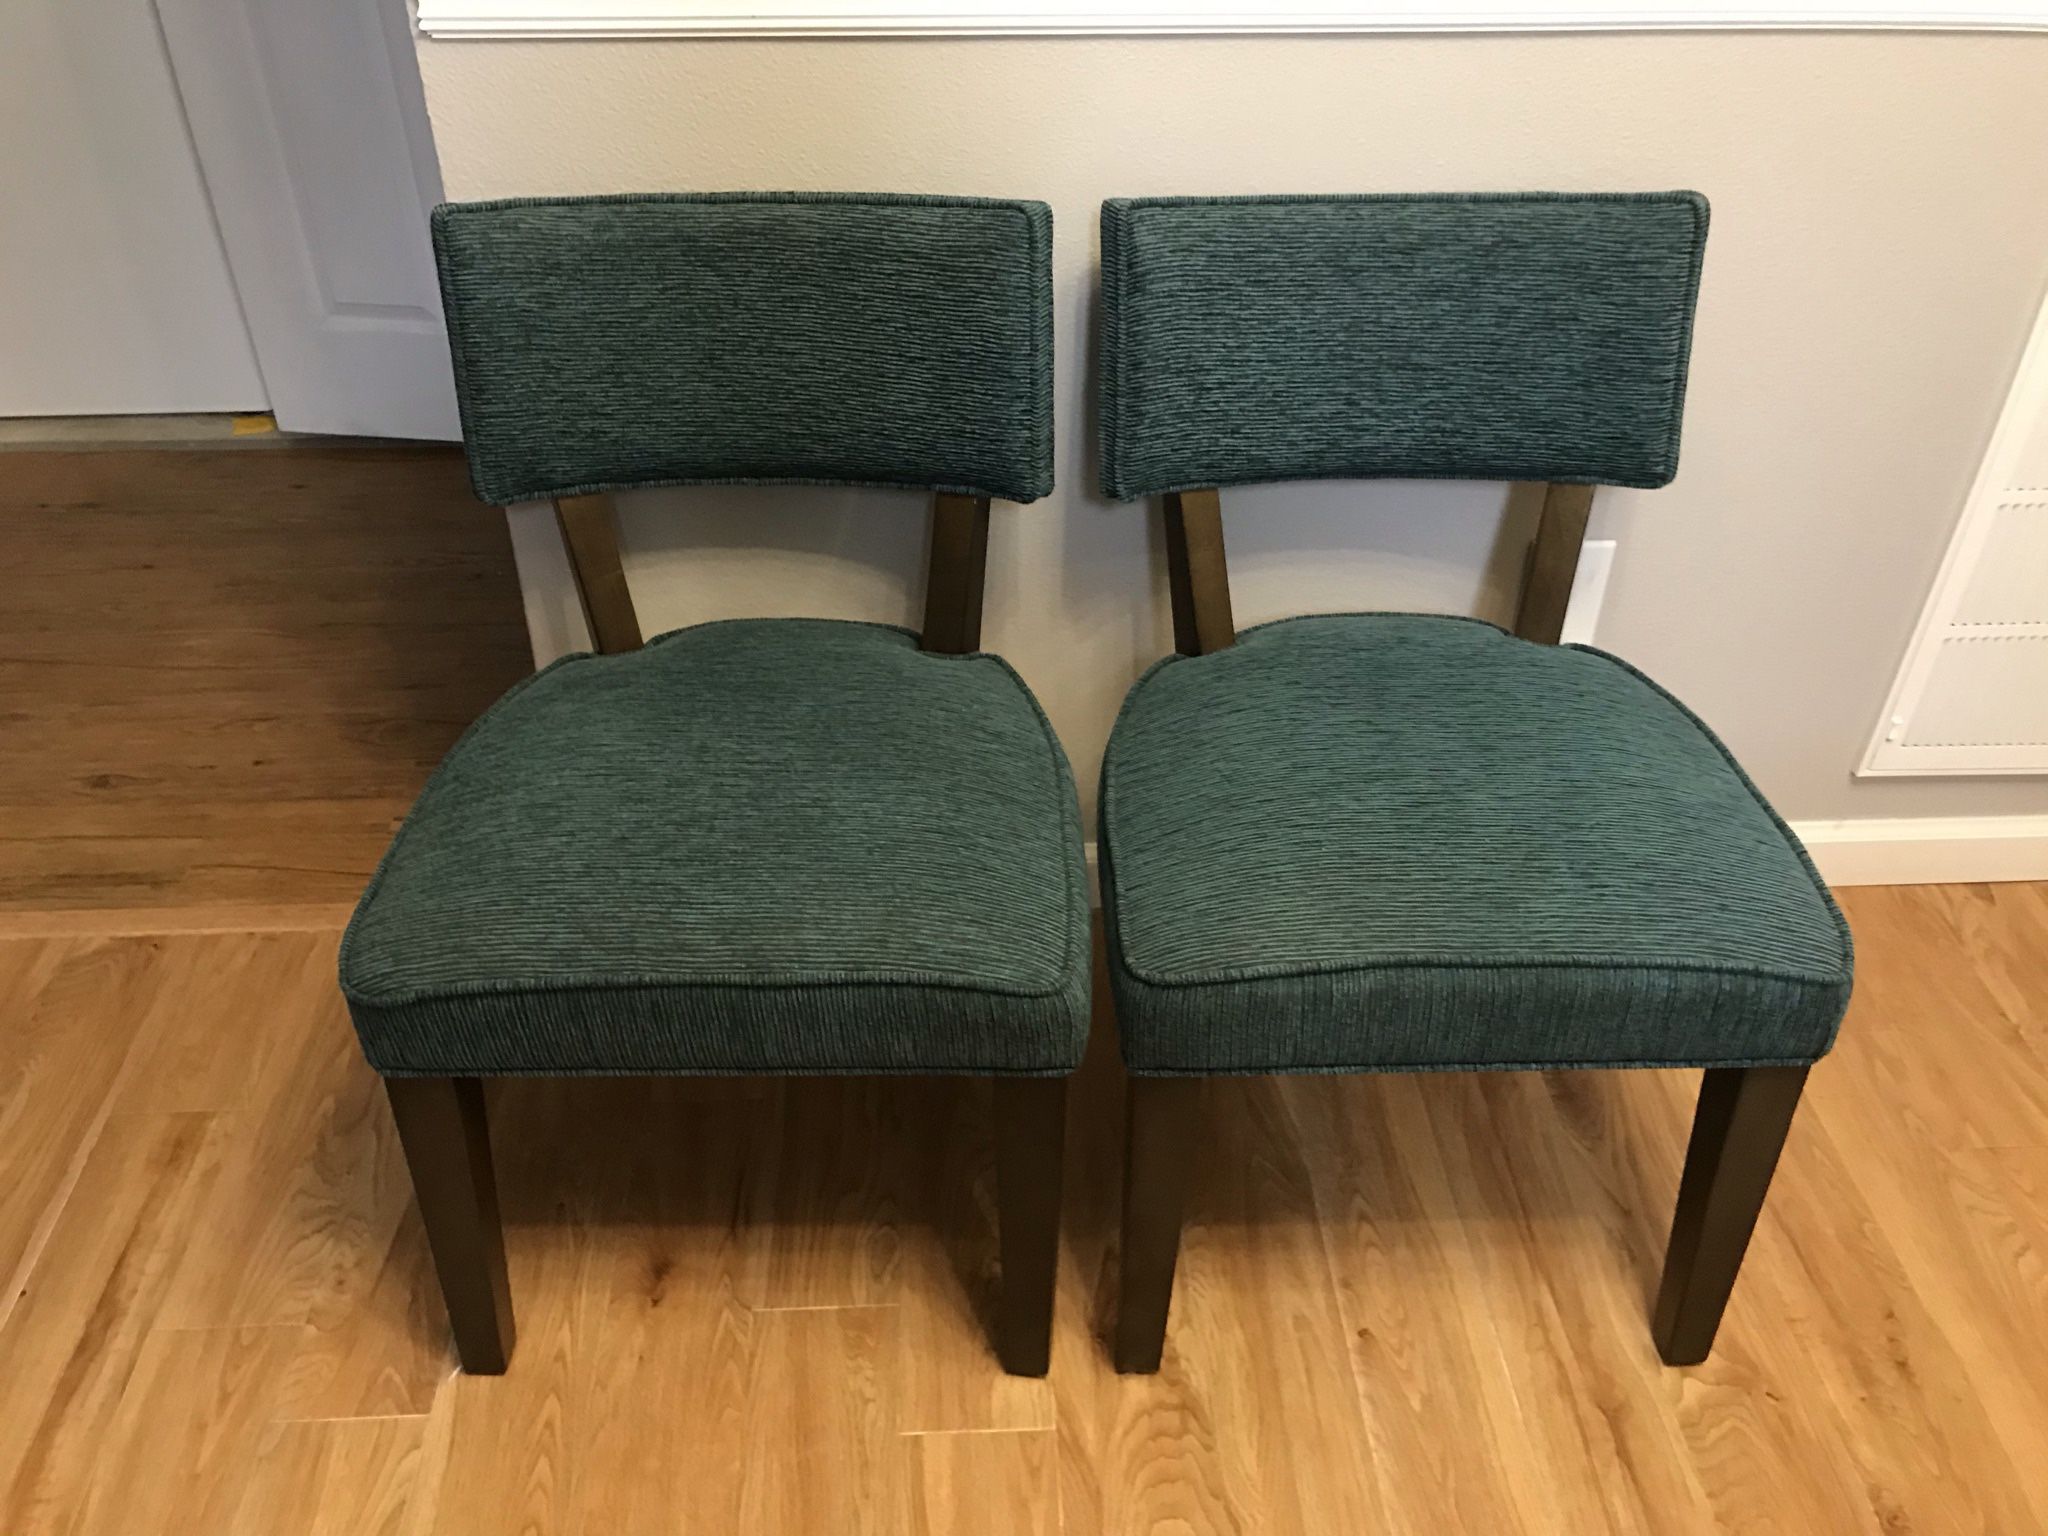 Two Brand New Chairs